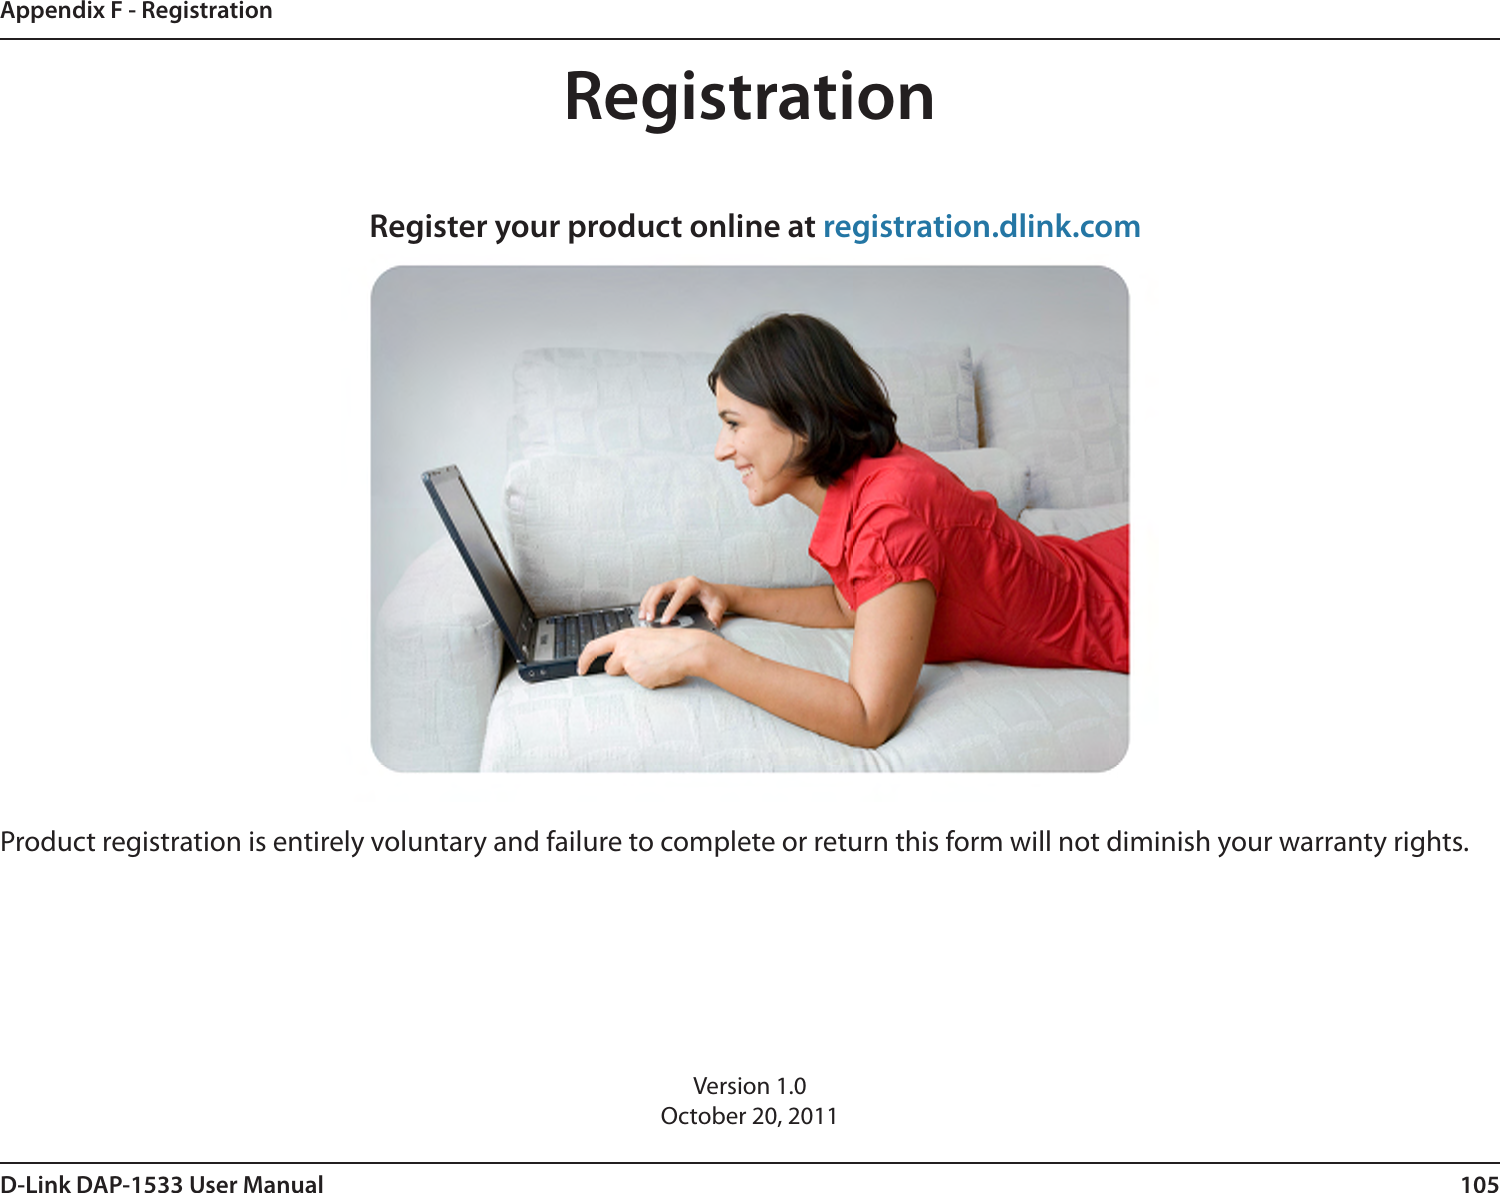 105D-Link DAP-1533 User ManualAppendix F - RegistrationVersion 1.0October 20, 2011Product registration is entirely voluntary and failure to complete or return this form will not diminish your warranty rights.RegistrationRegister your product online at registration.dlink.com